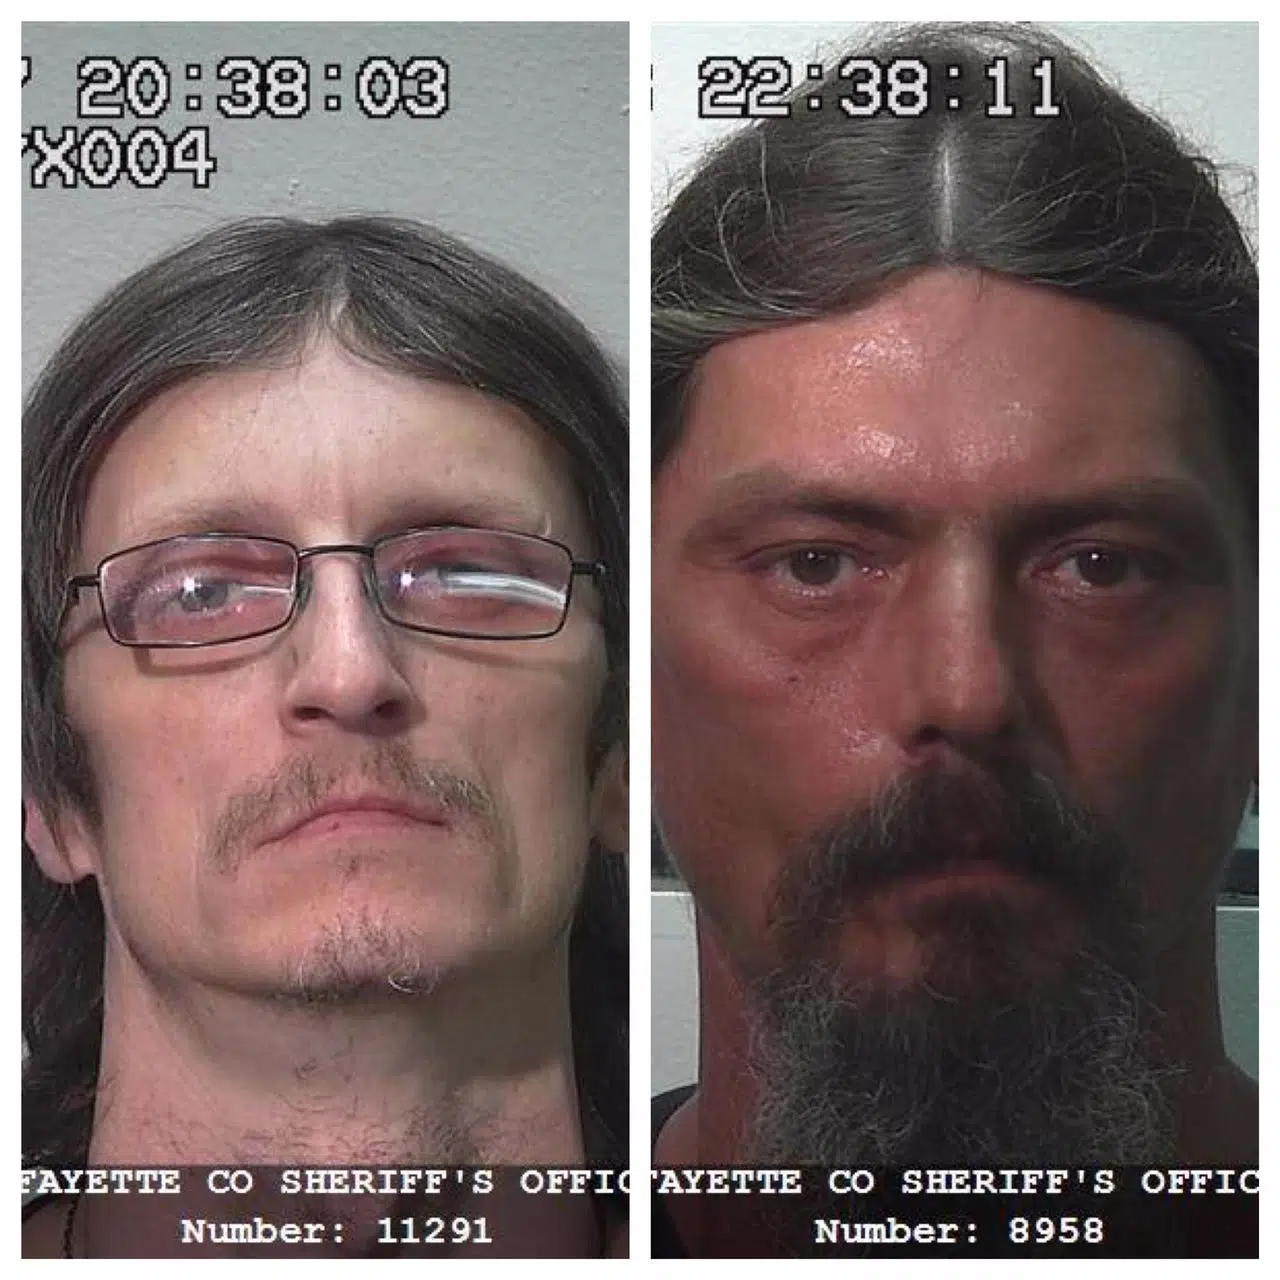 Two Vandalia men in the Fayette County Jail on Burglary Charges, arrested after search Sunday morning